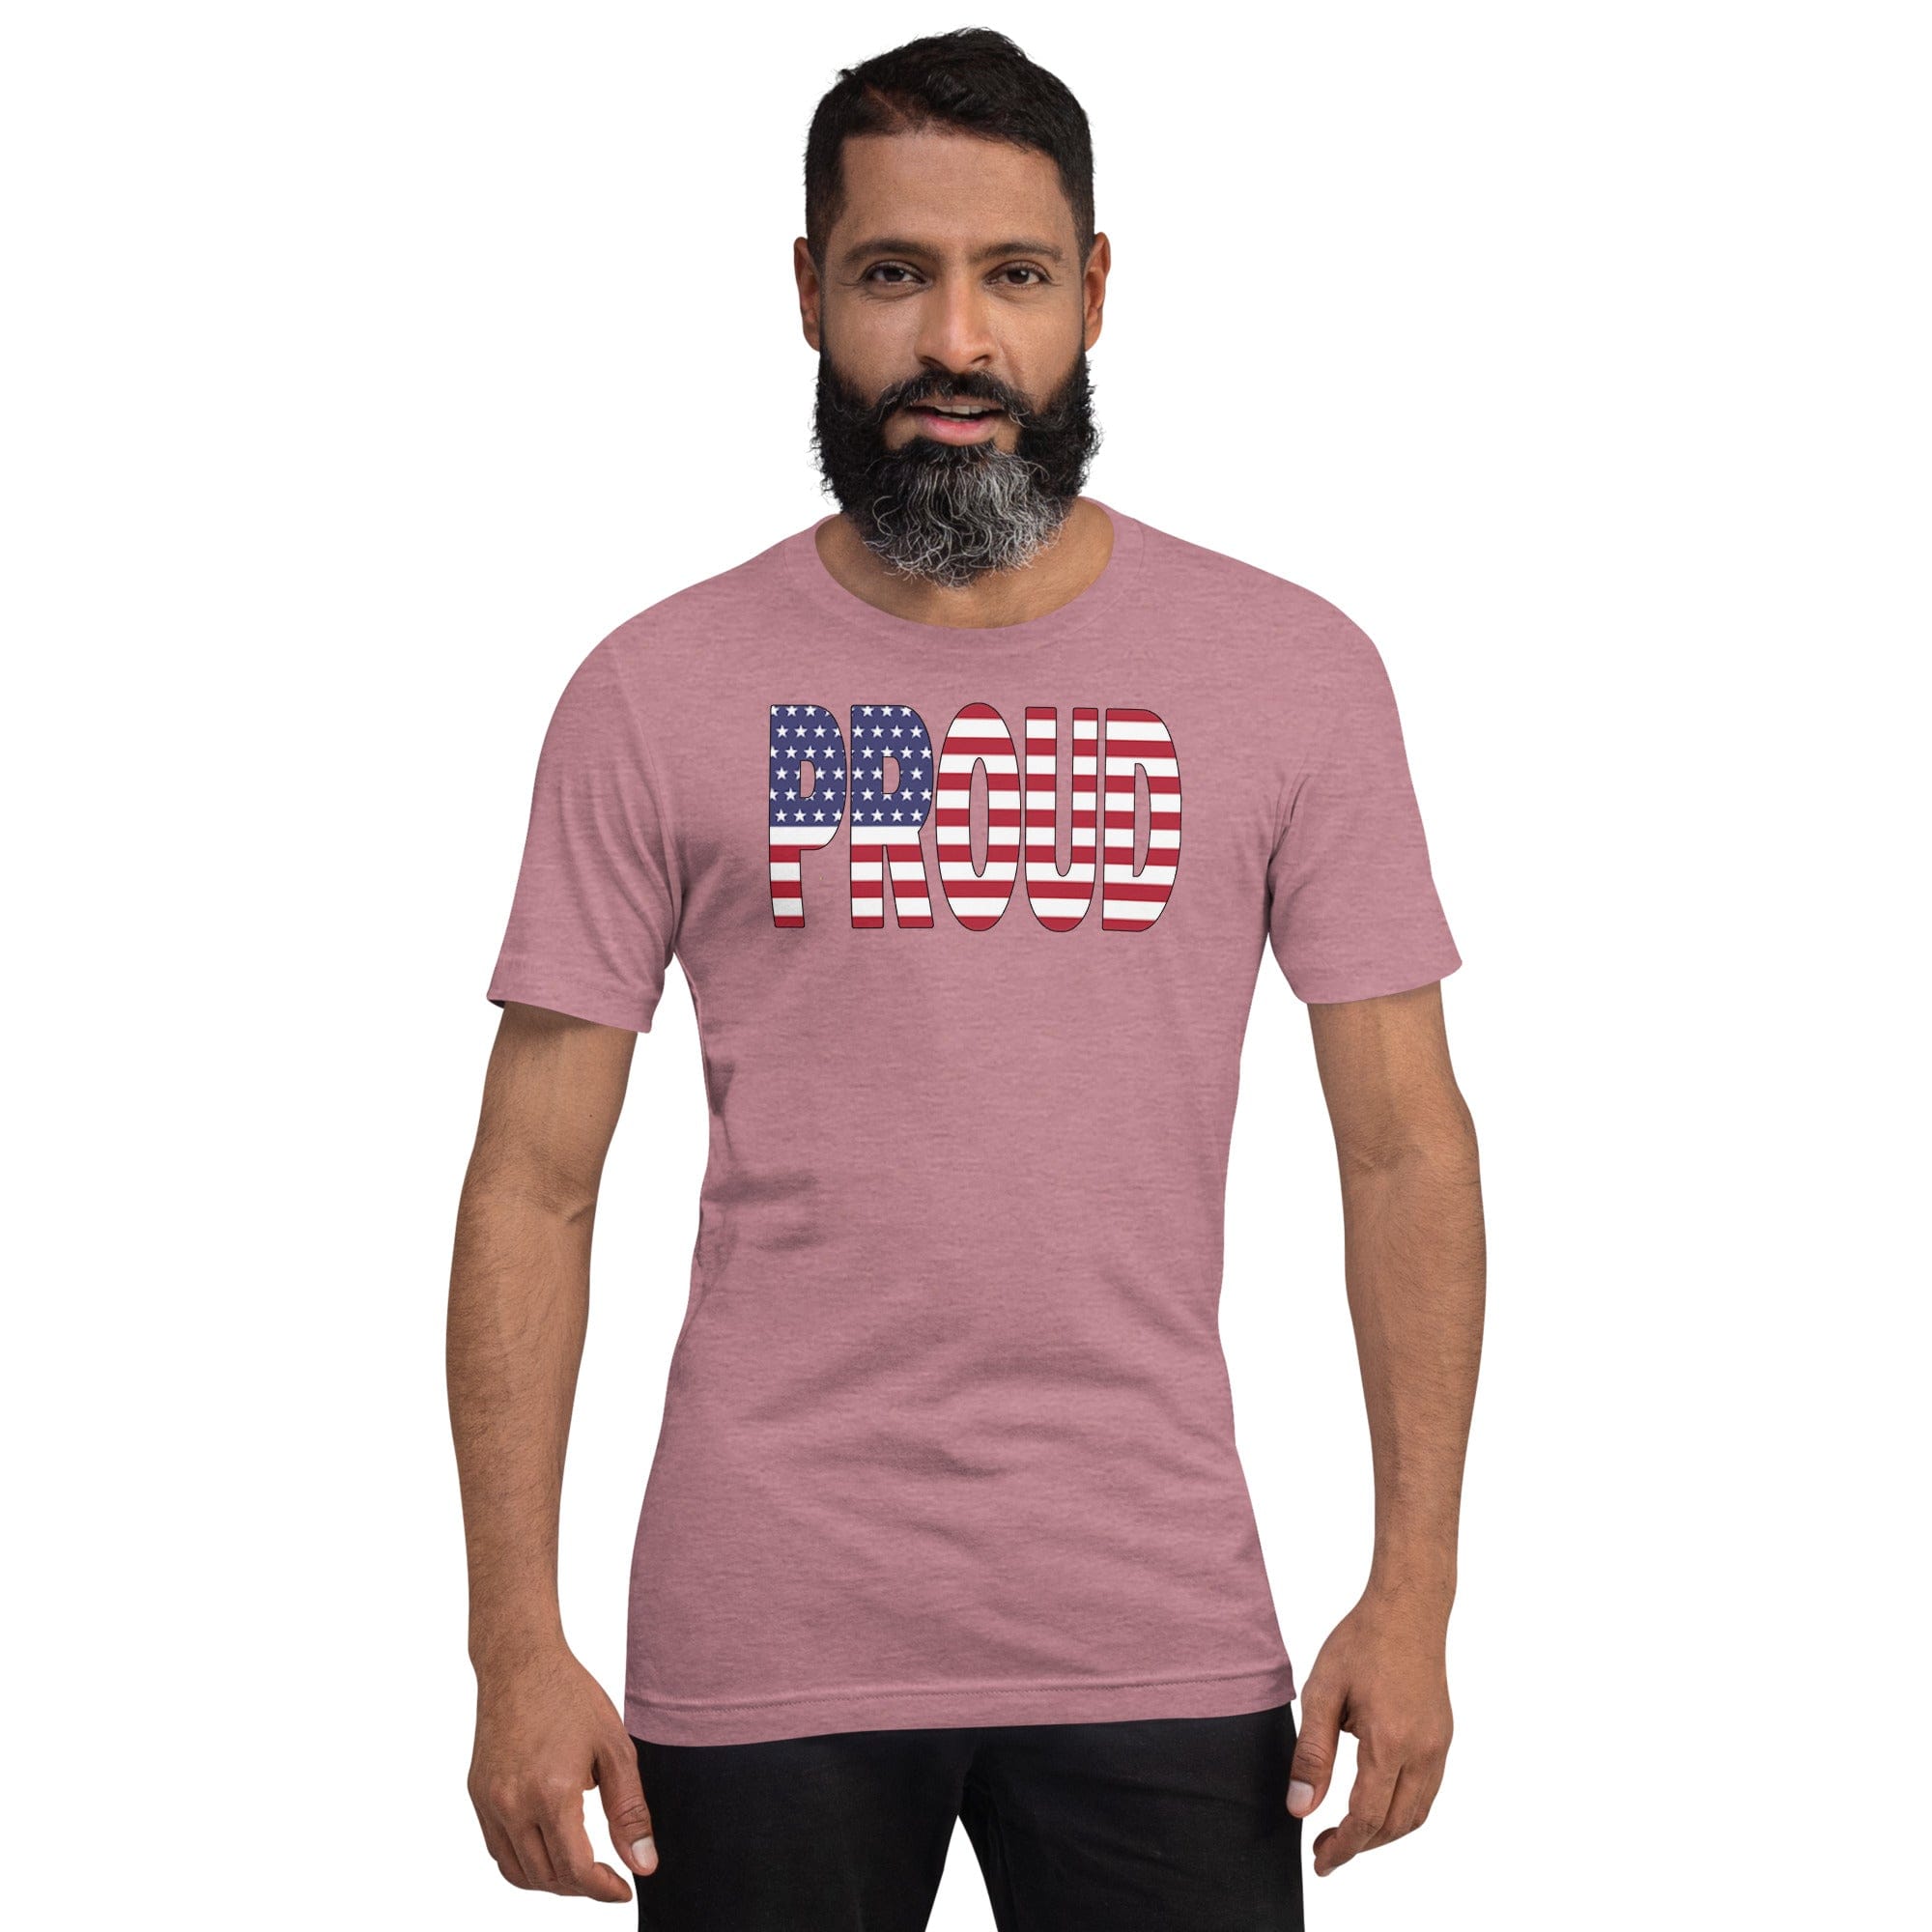 American Flag designed to spell Proud on a maroon color t-shirt worn by a black man.